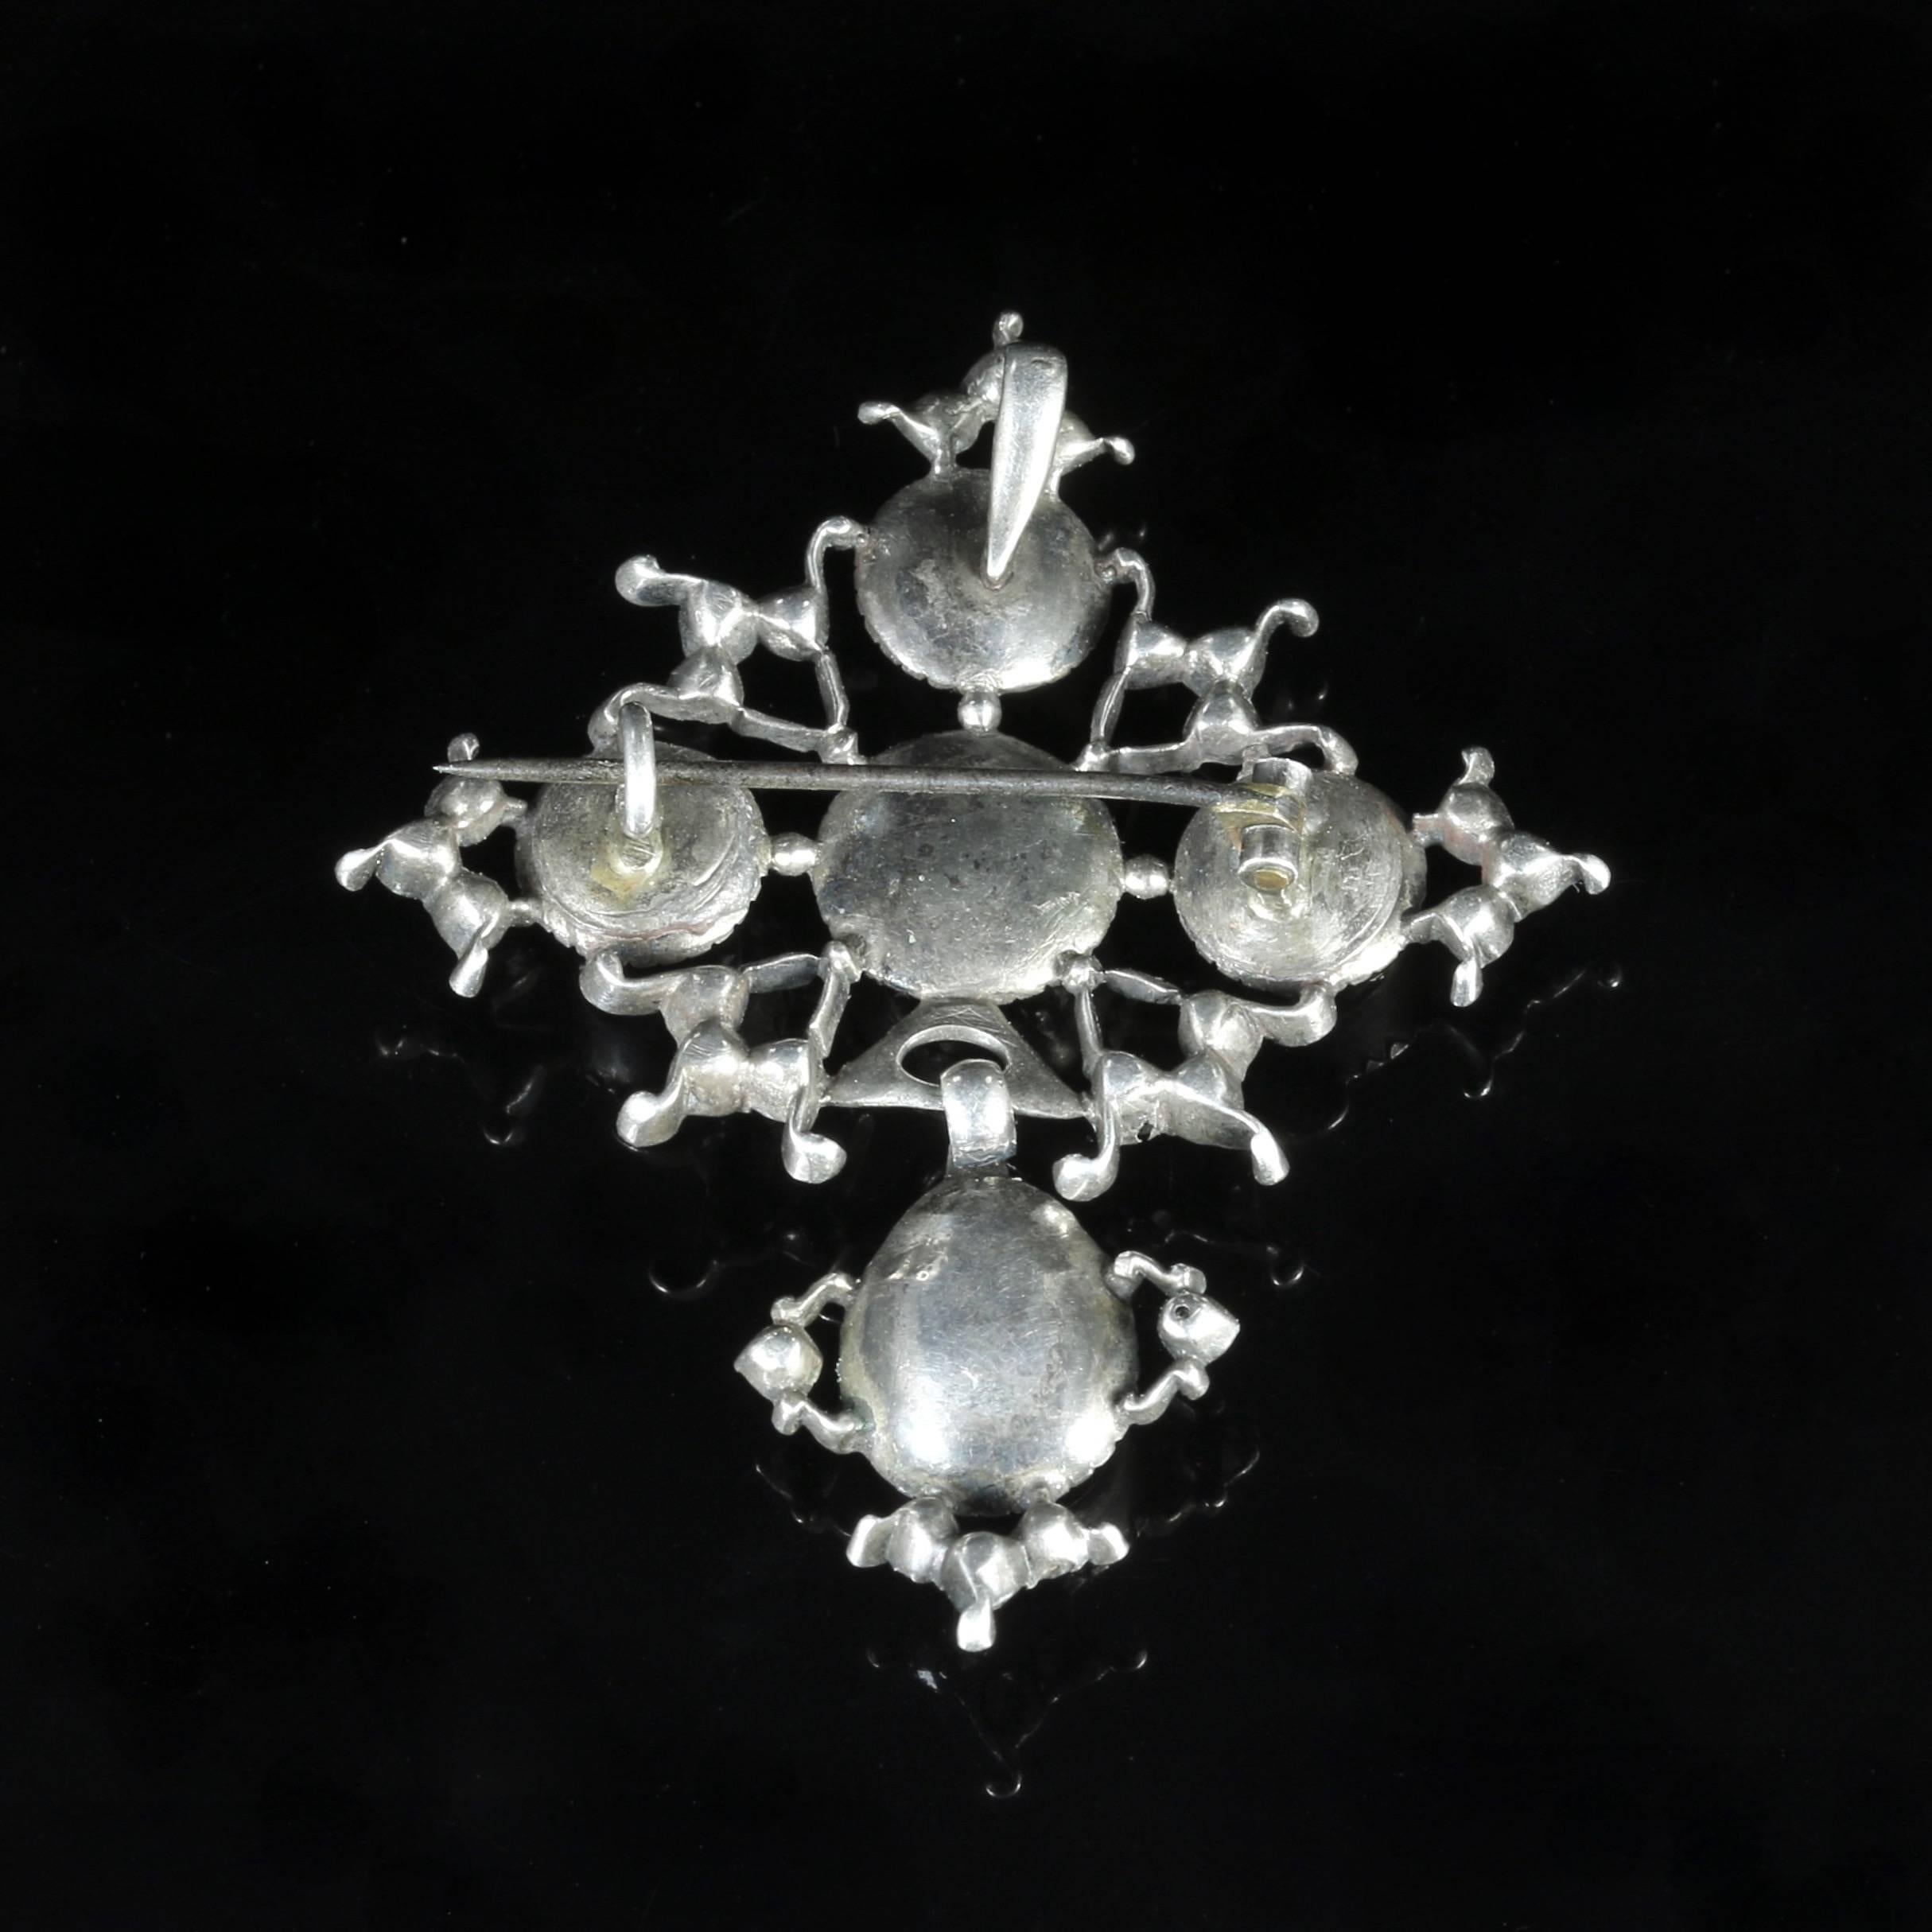 This genuine antique Sterling Silver Paste pendant brooch is circa 1800.

The large old cut Paste stones are foiled back and genuine to the pendant brooch.

It has a closed backed gallery which was typical in the Georgian era.

The pendant dropper